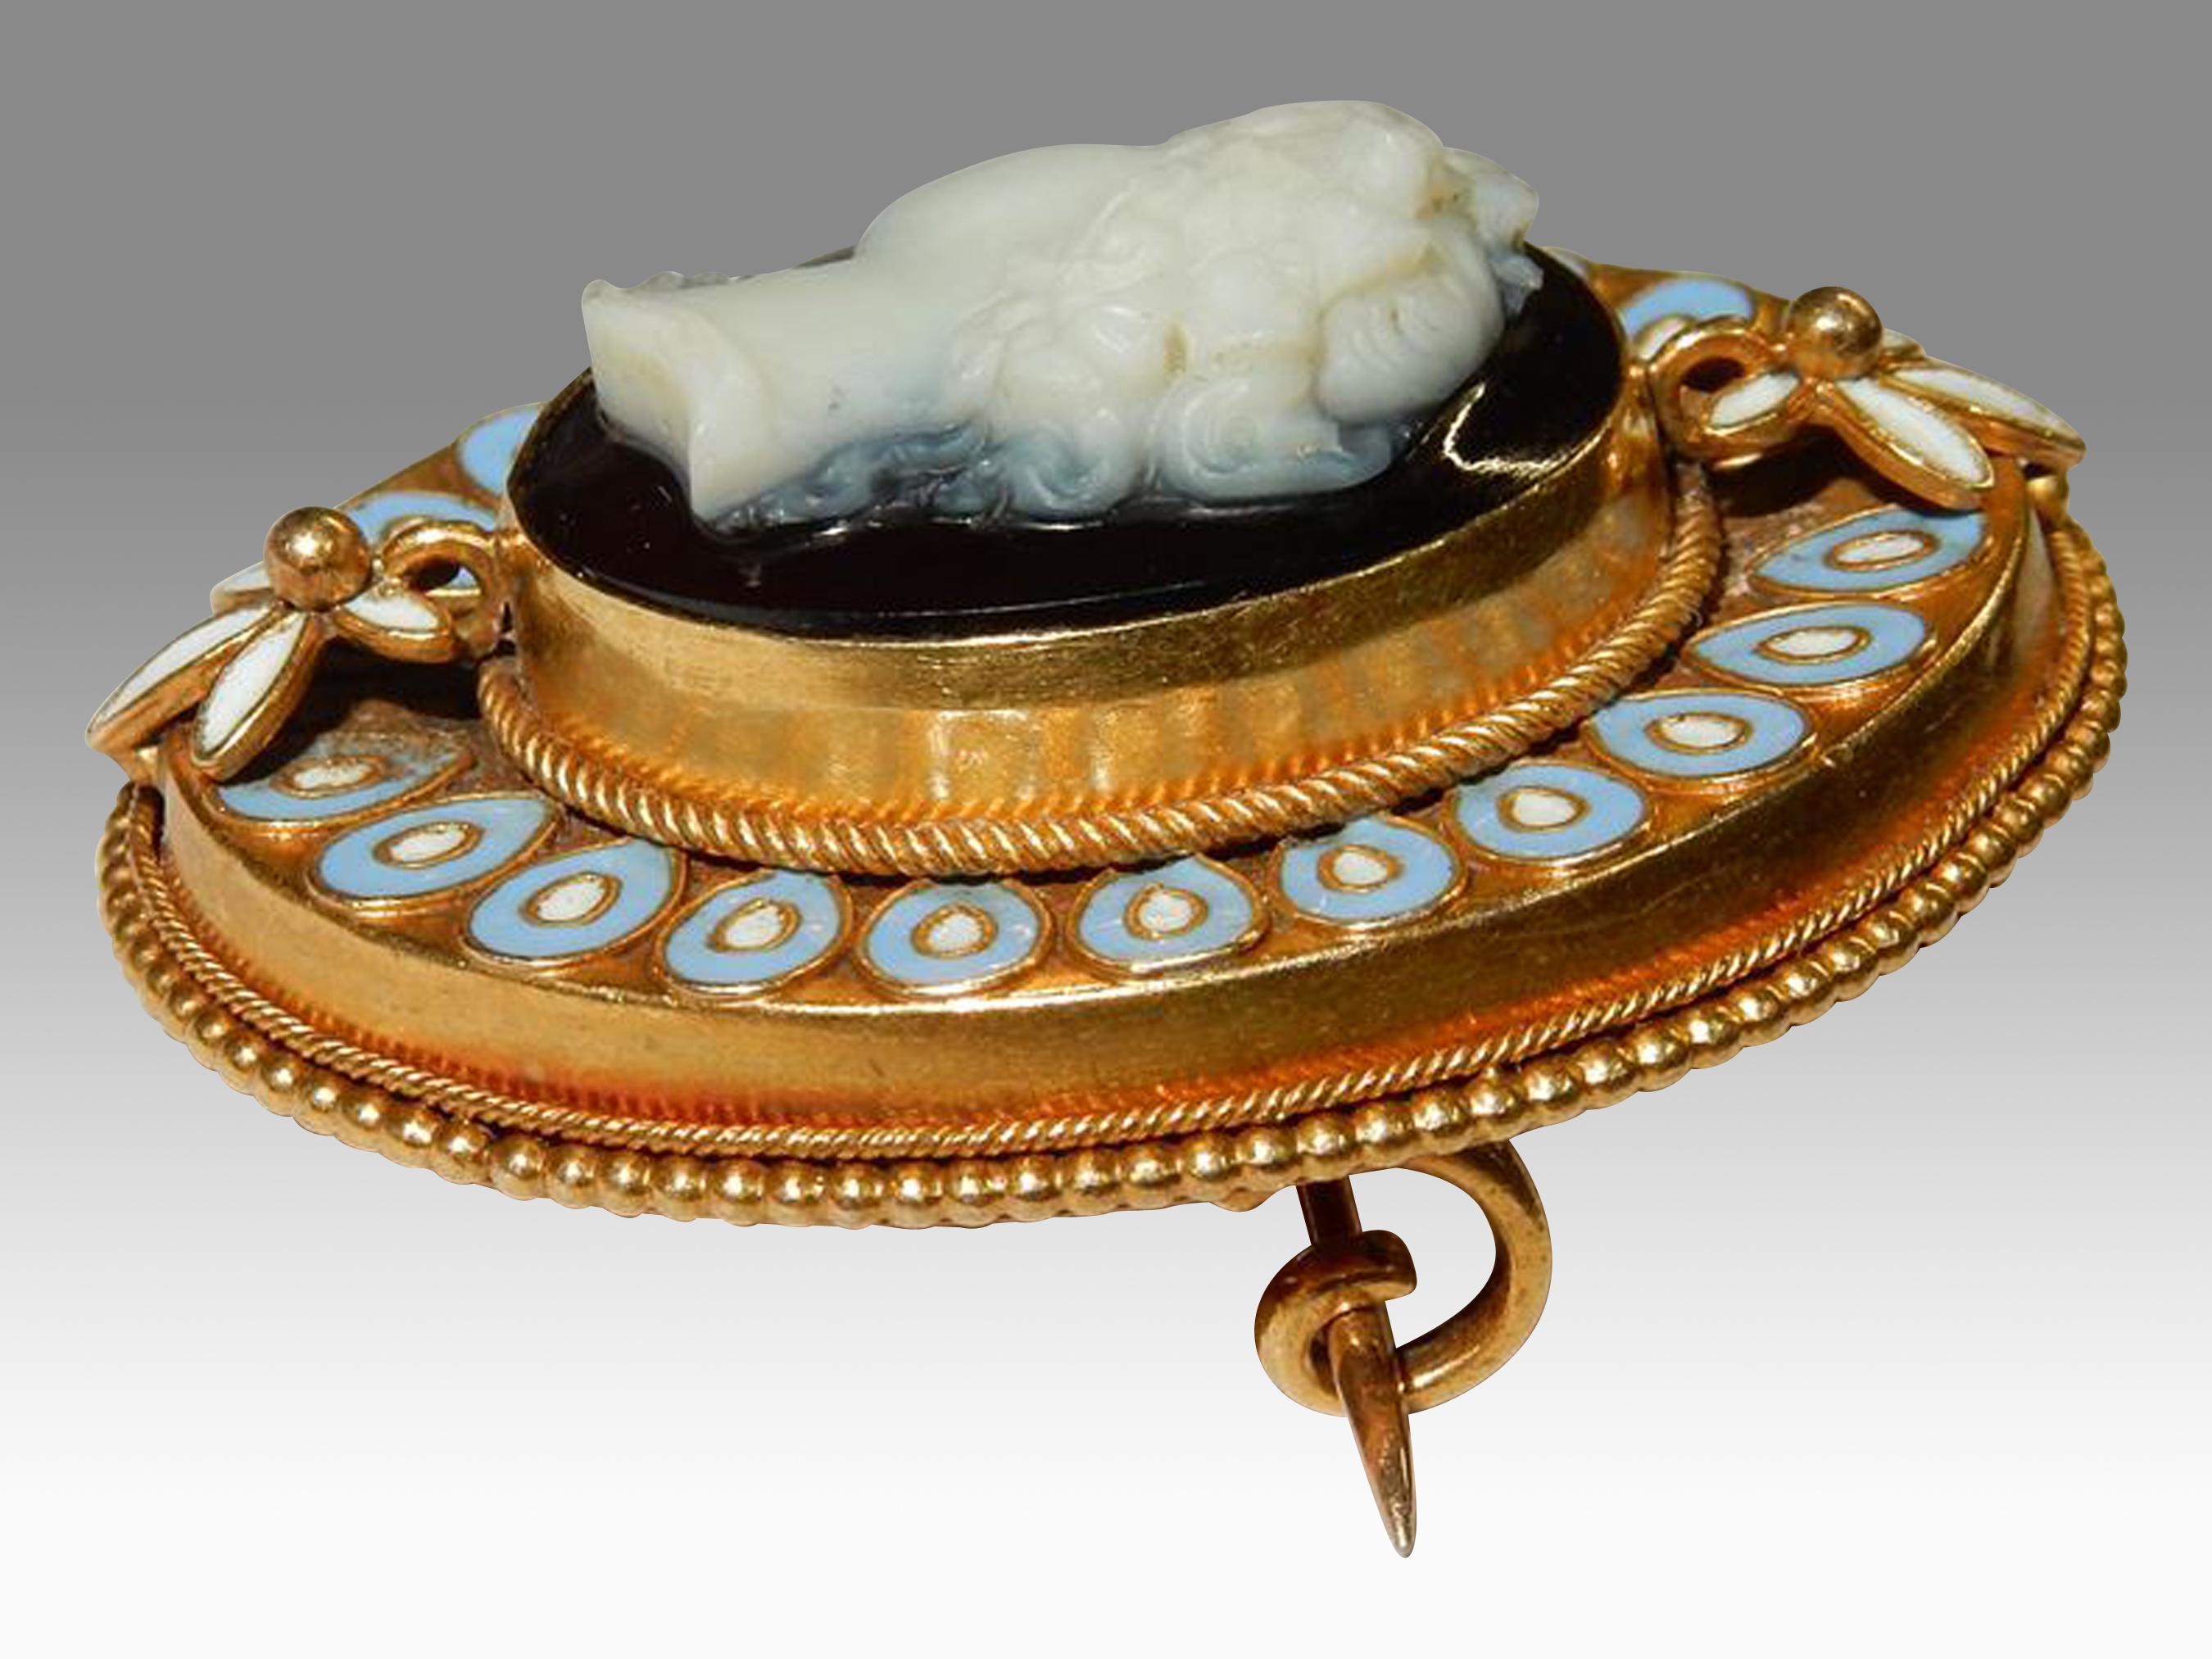 Important Exquisite Rare Antique Hardstone Gold & Enamel Cameo Brooch For Sale 2